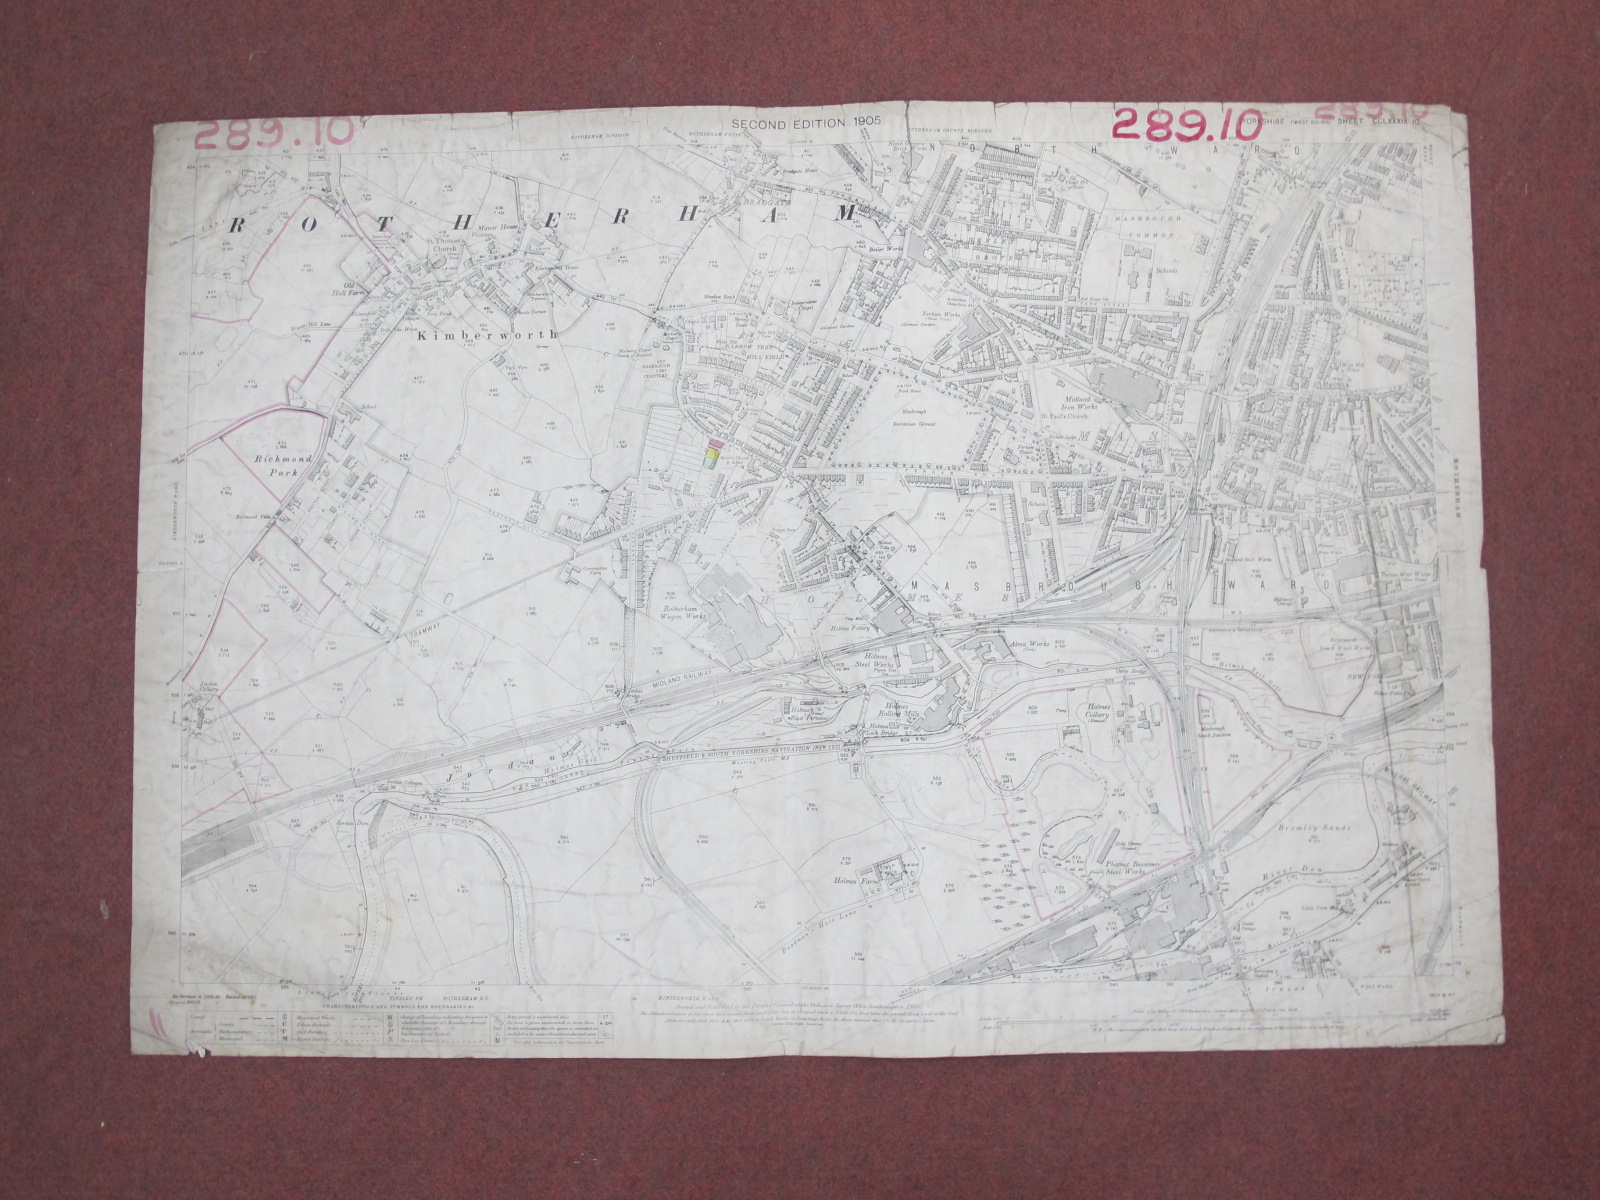 West Riding Yorkshire Maps, Rotherham and area - some dates noted 1903, 1905, 1929, various - Image 5 of 10